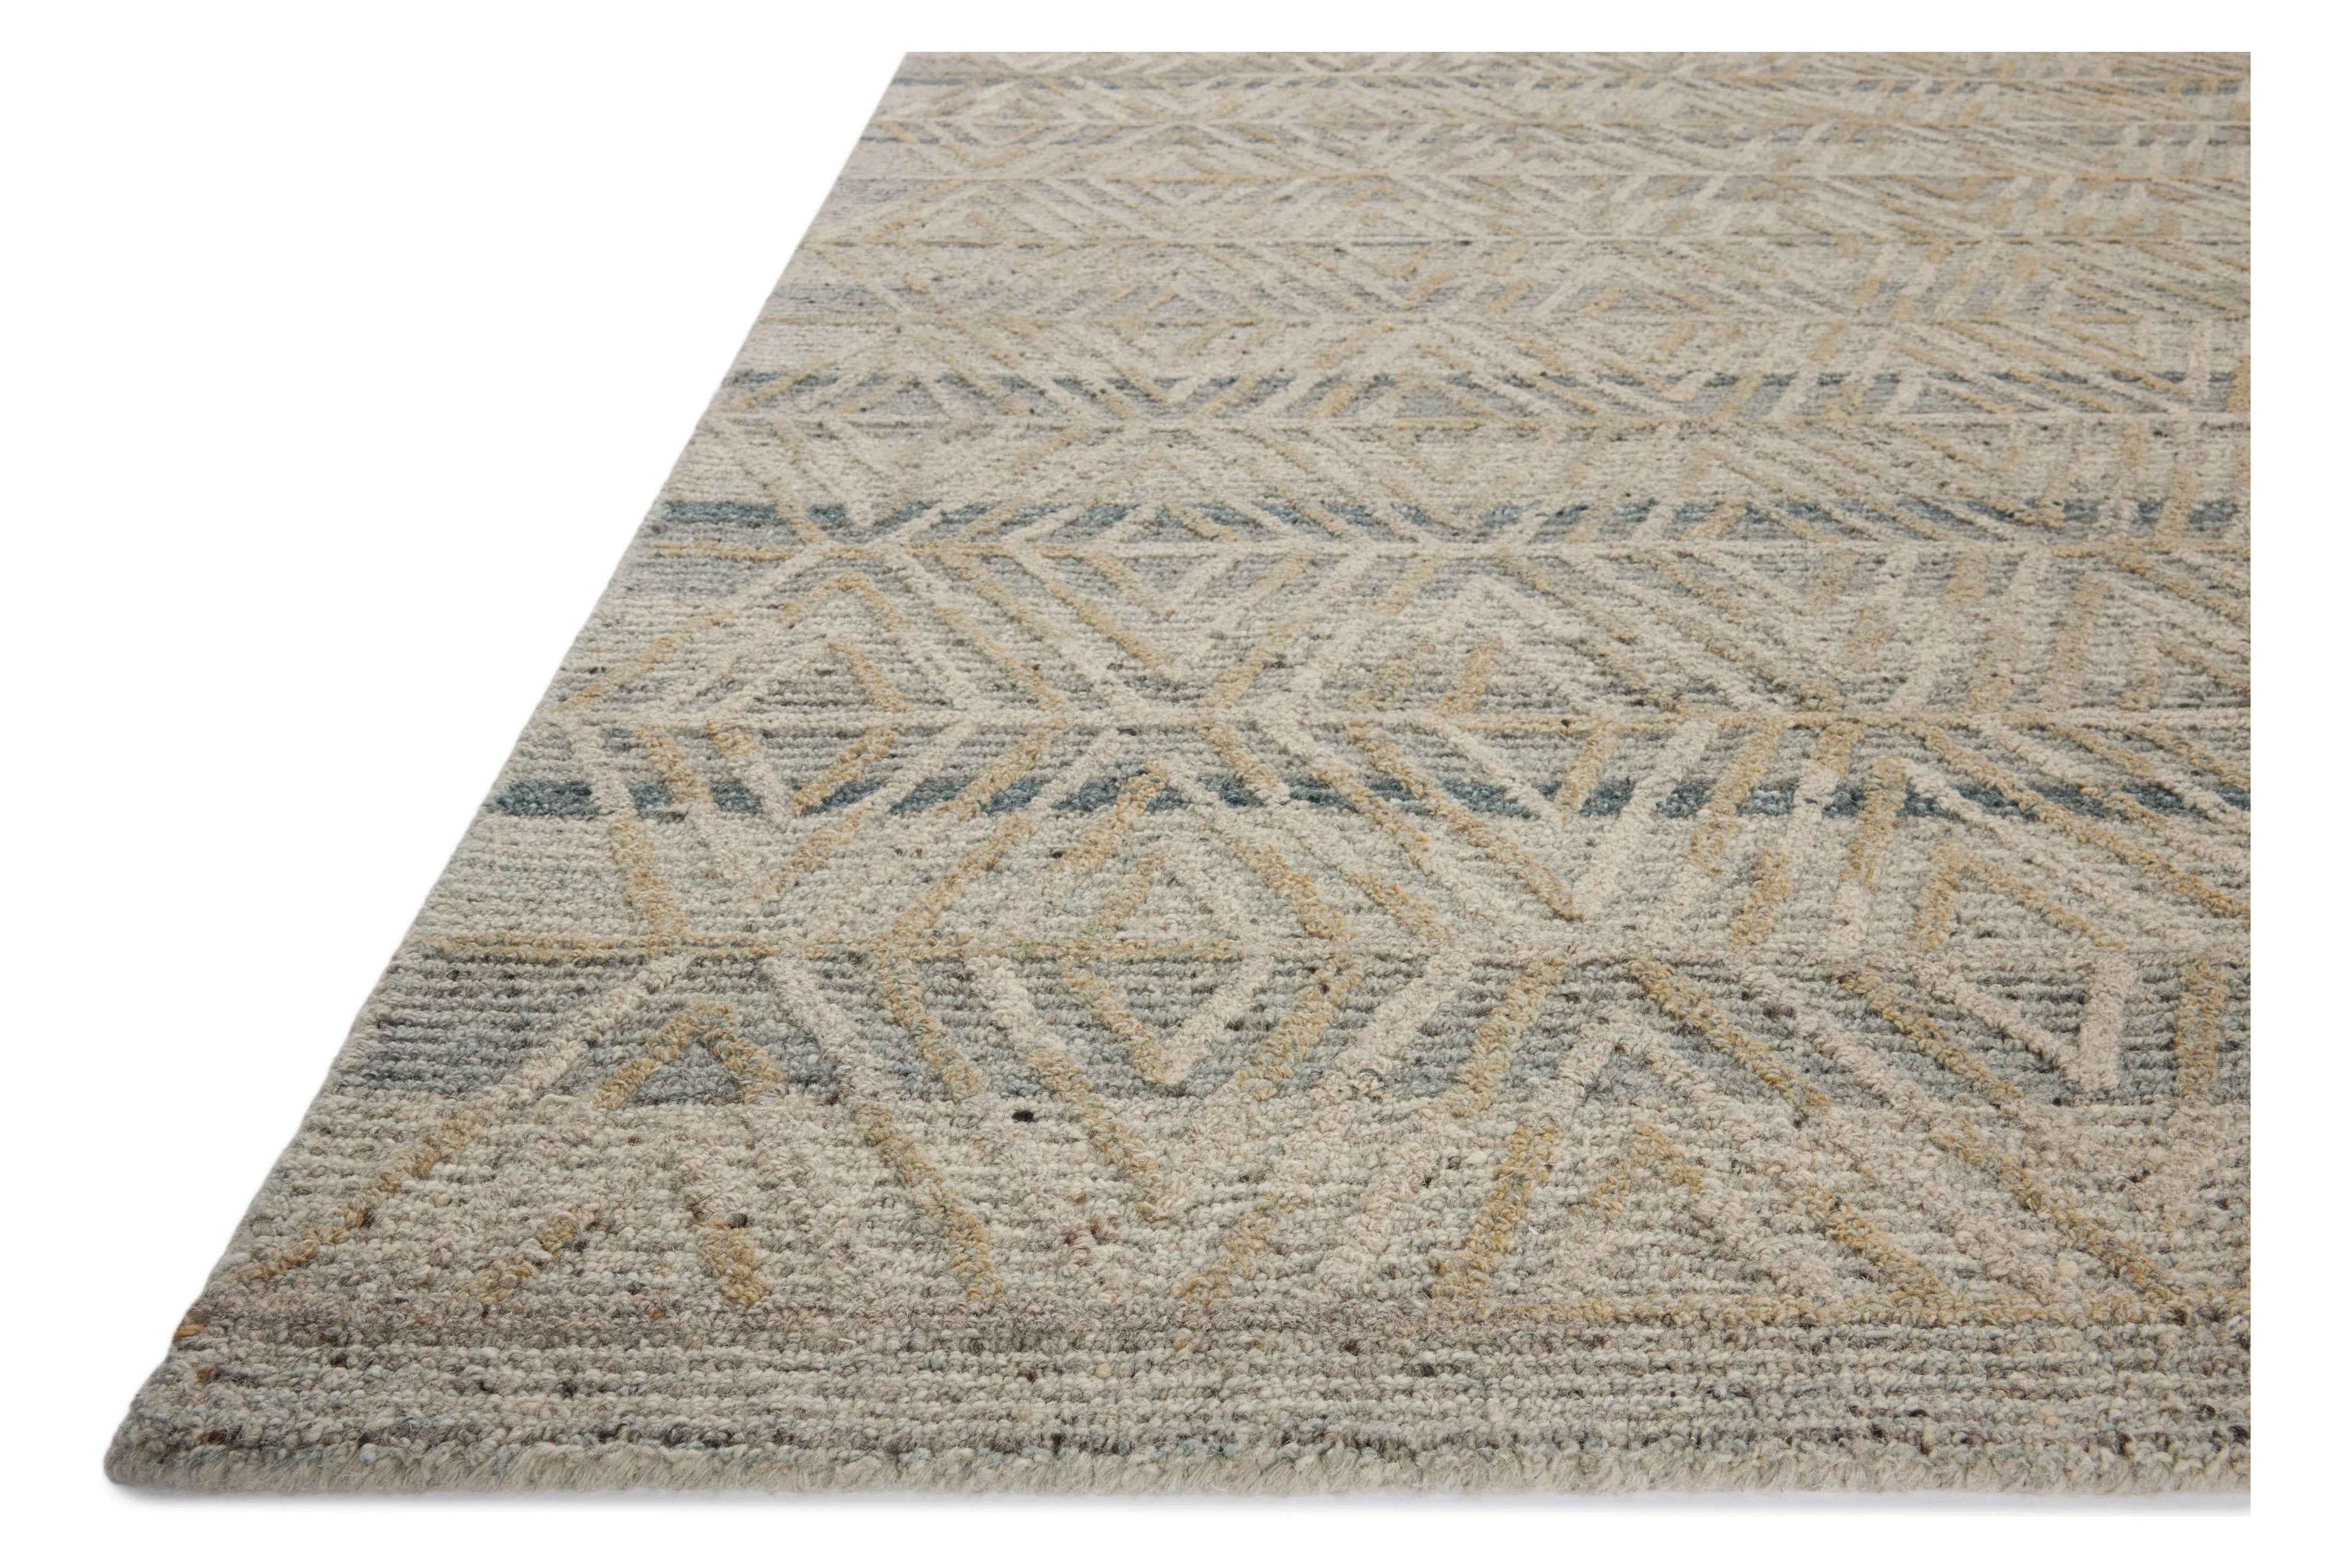 The Elias Fog / Natural Rug is a hand-tufted wool area rug with lively graphic patterns in earth and stone tones. There’s a unique texture to the rug made by over-tufting, in which a design is hand-tufted over a tufted base, creating a subtle high-low pile. Amethyst Home provides interior design, new home construction design consulting, vintage area rugs, and lighting in the Portland metro area.